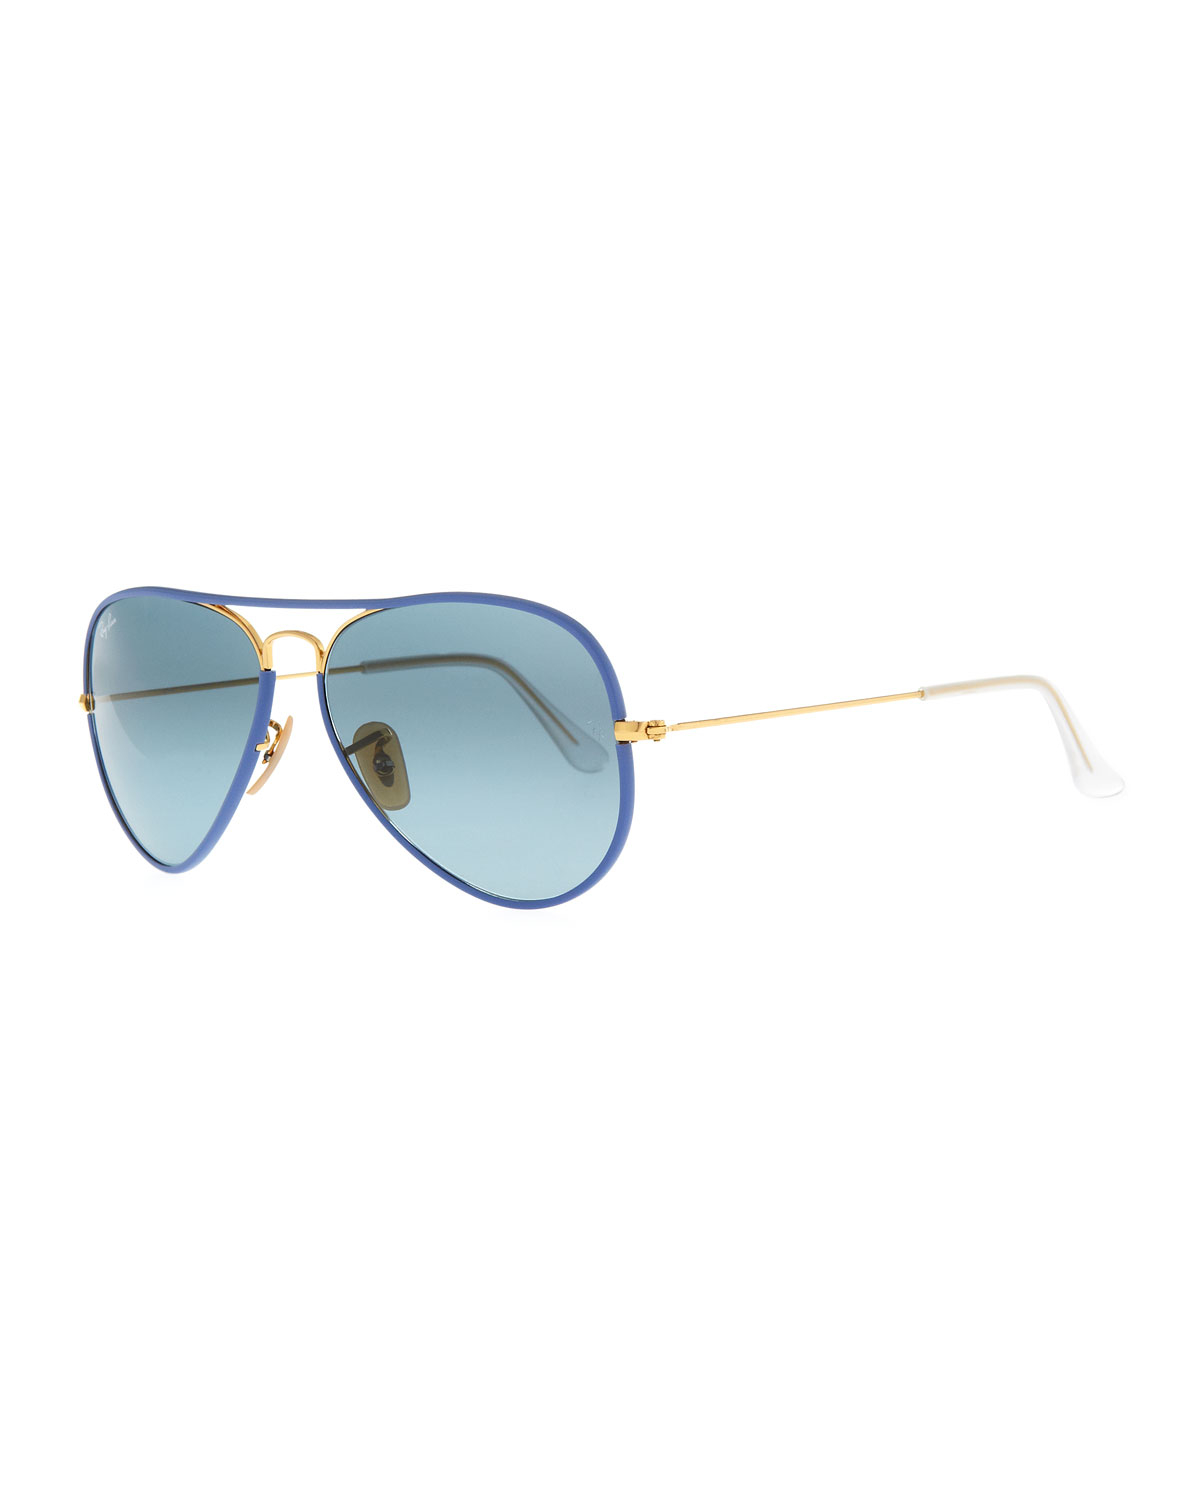 Ray Ban Aviator Gradient Sunglasses Blue In Blue For Men Lyst 